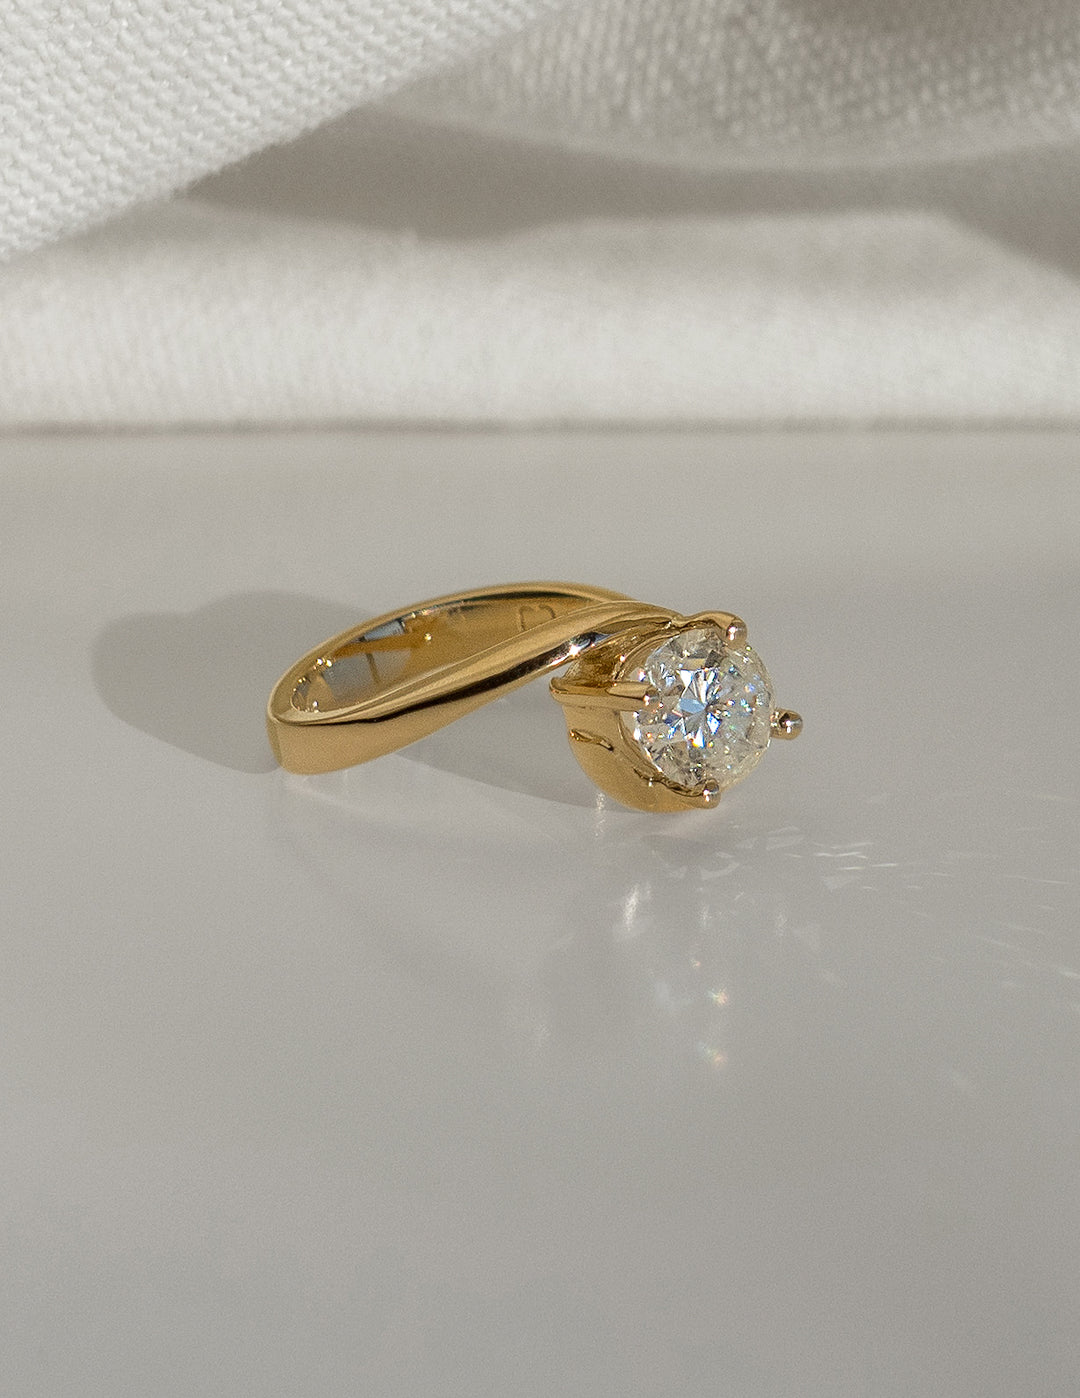 Cadette Oval Rapture engagement ring. Oval Ocean Inspired Engagement Ring. Oval Nature Inspired Engagement Ring.